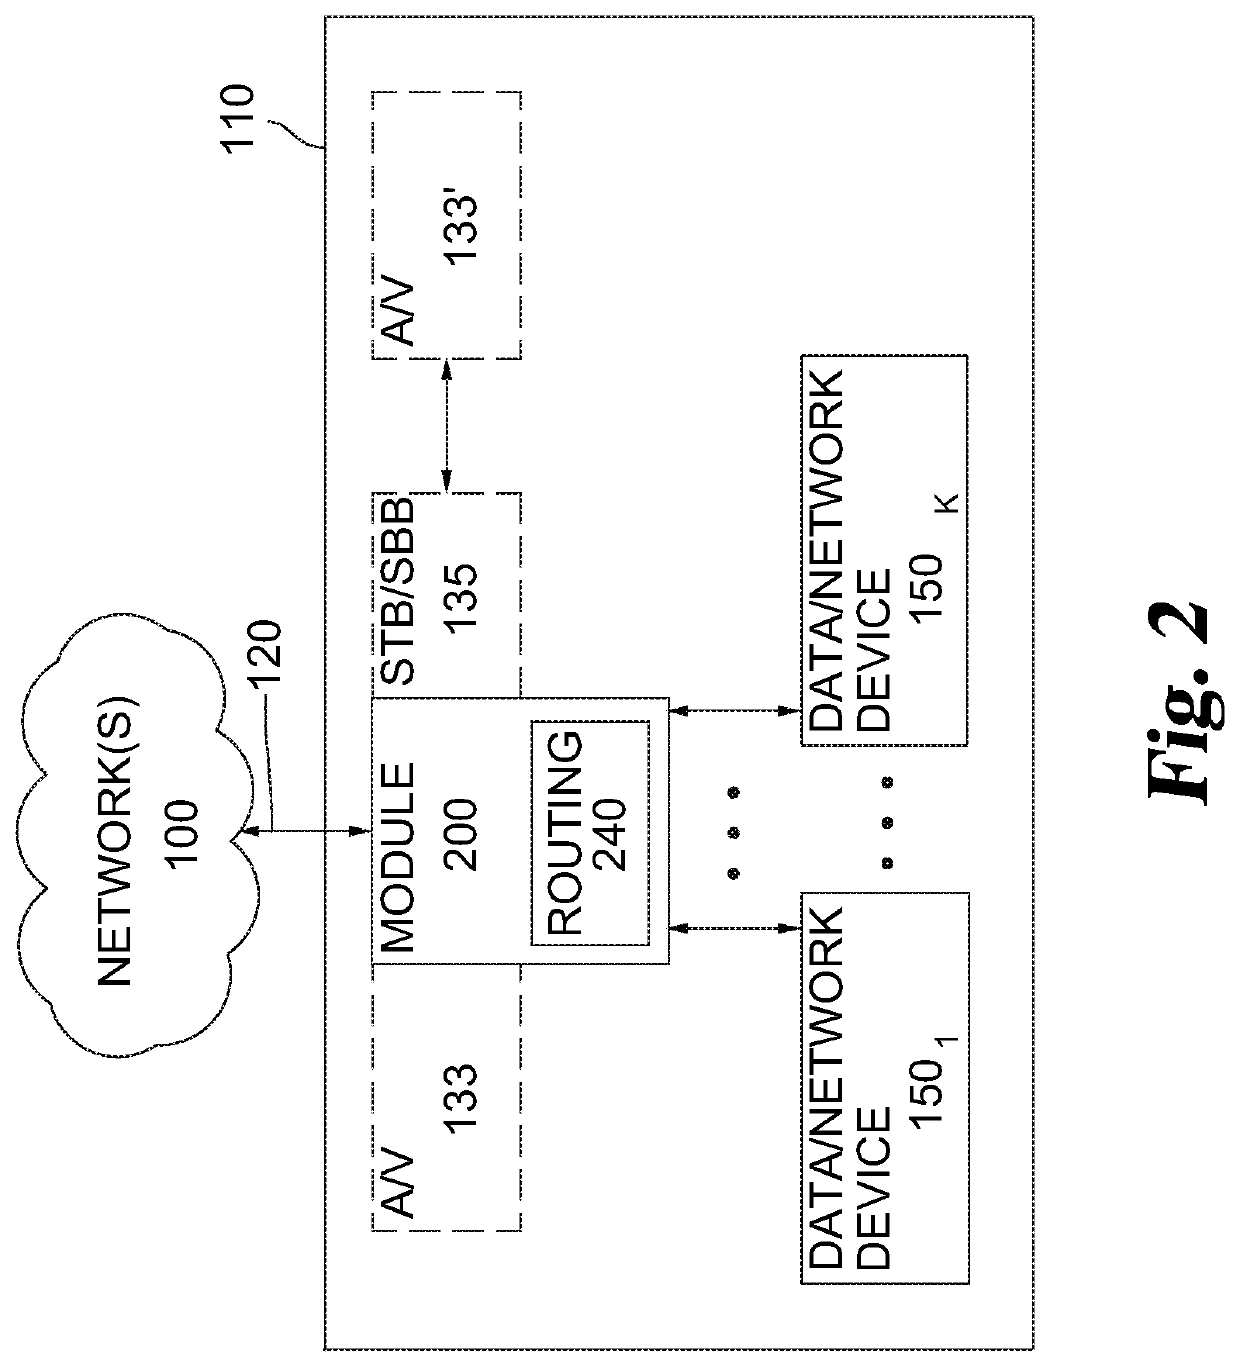 Networking modules for display systems